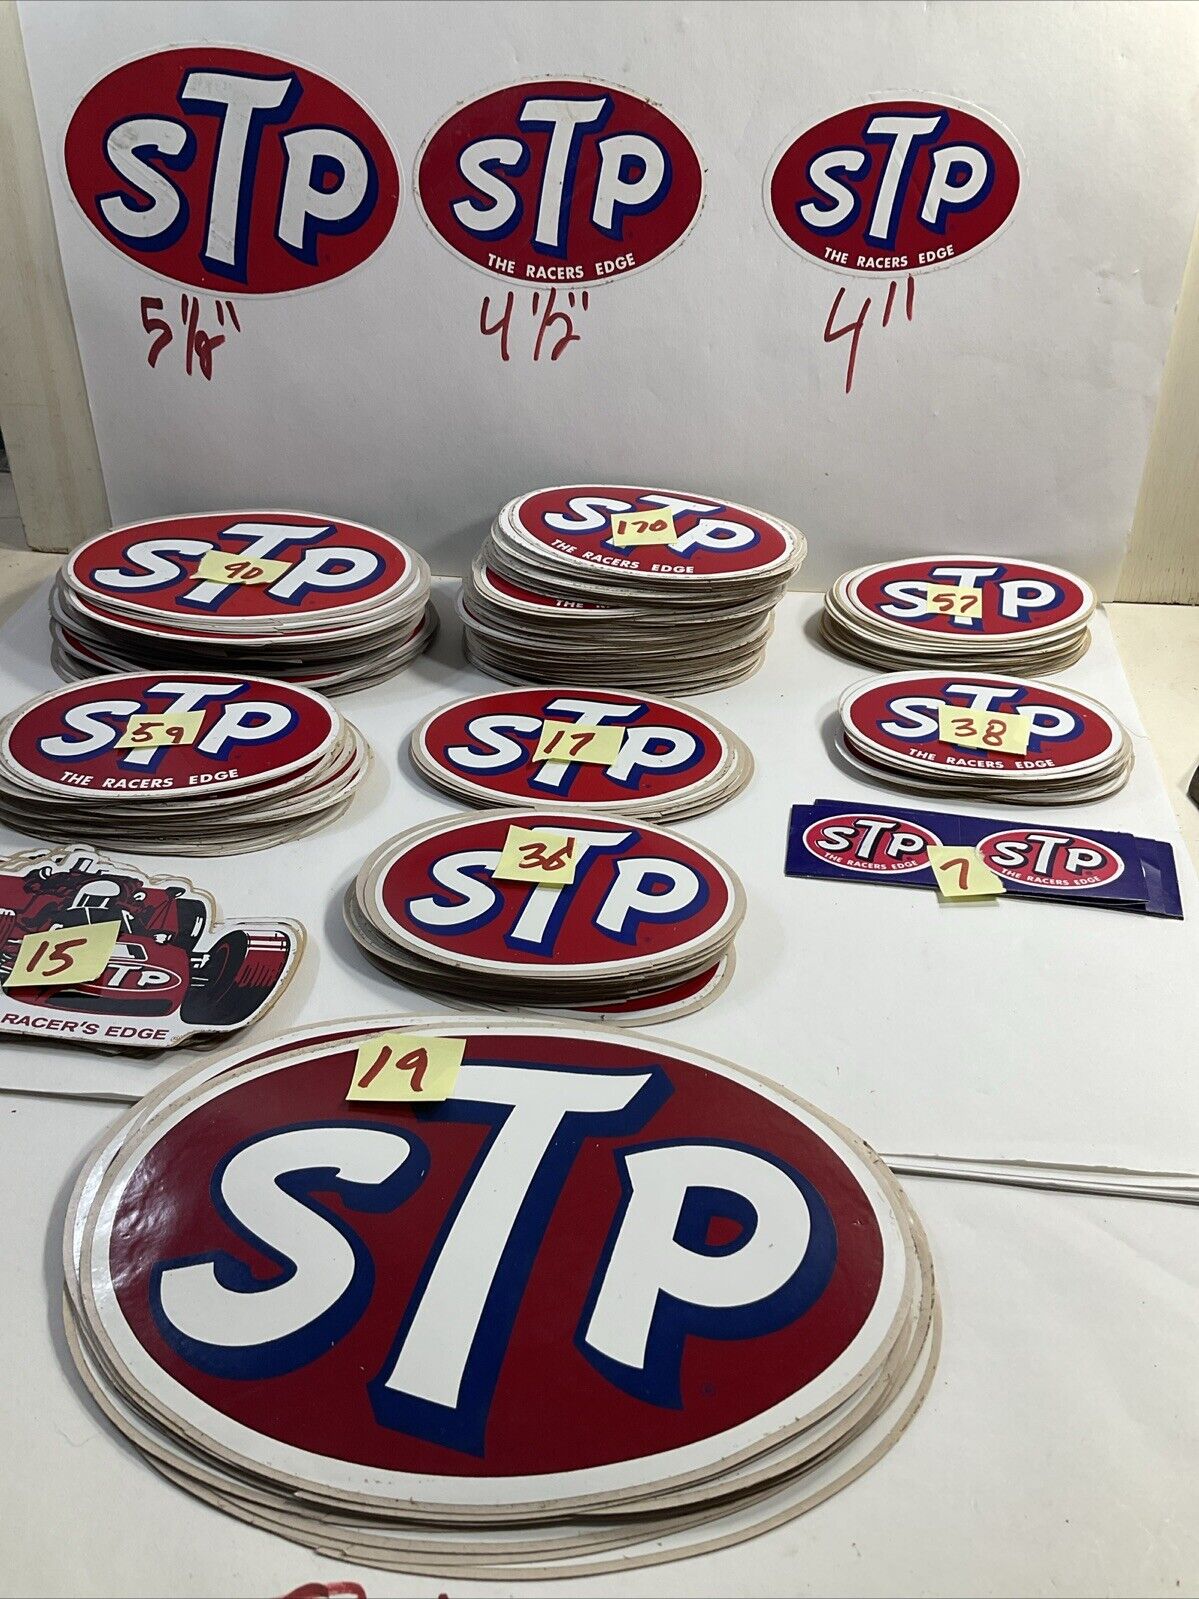 STP vinal Stickers Vintage NASCAR FROM LATE 60s Over 500